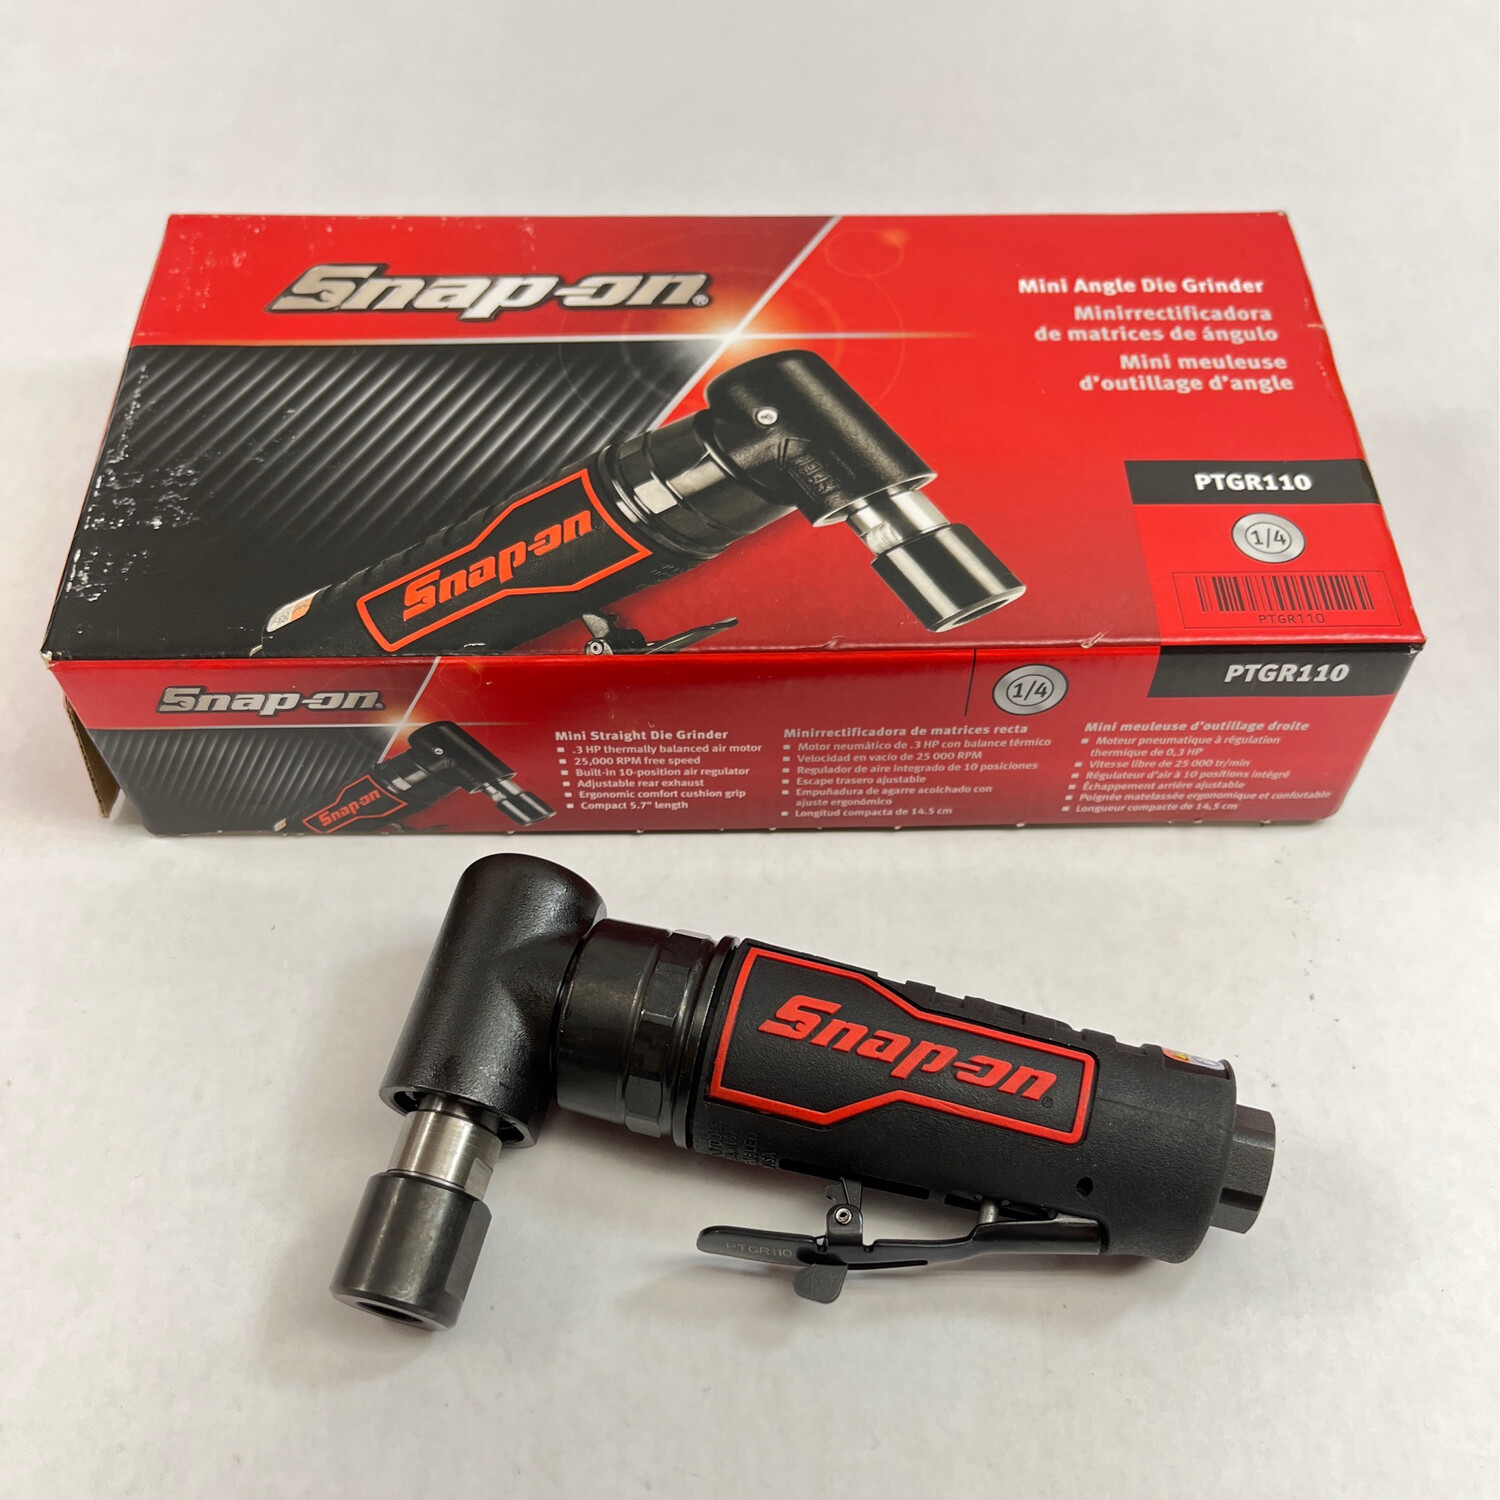 Snap On 1/3 HP Right Angle Mini Die Grinder, PTGR110